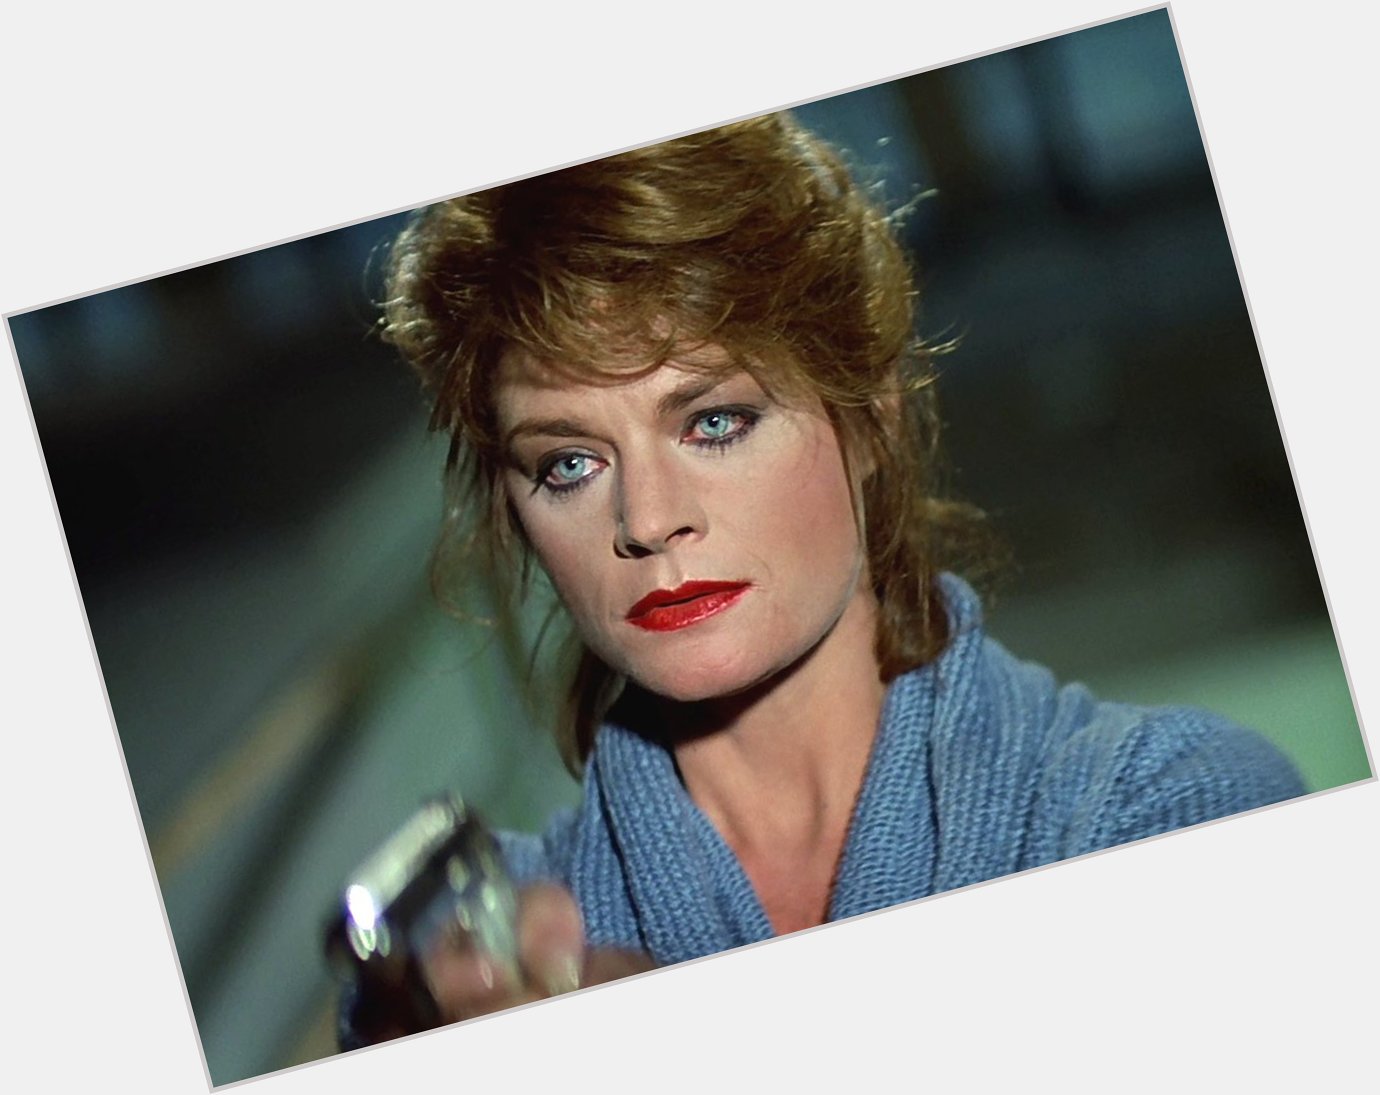 Happy birthday to Meg Foster! She\s now 73 years old today.  